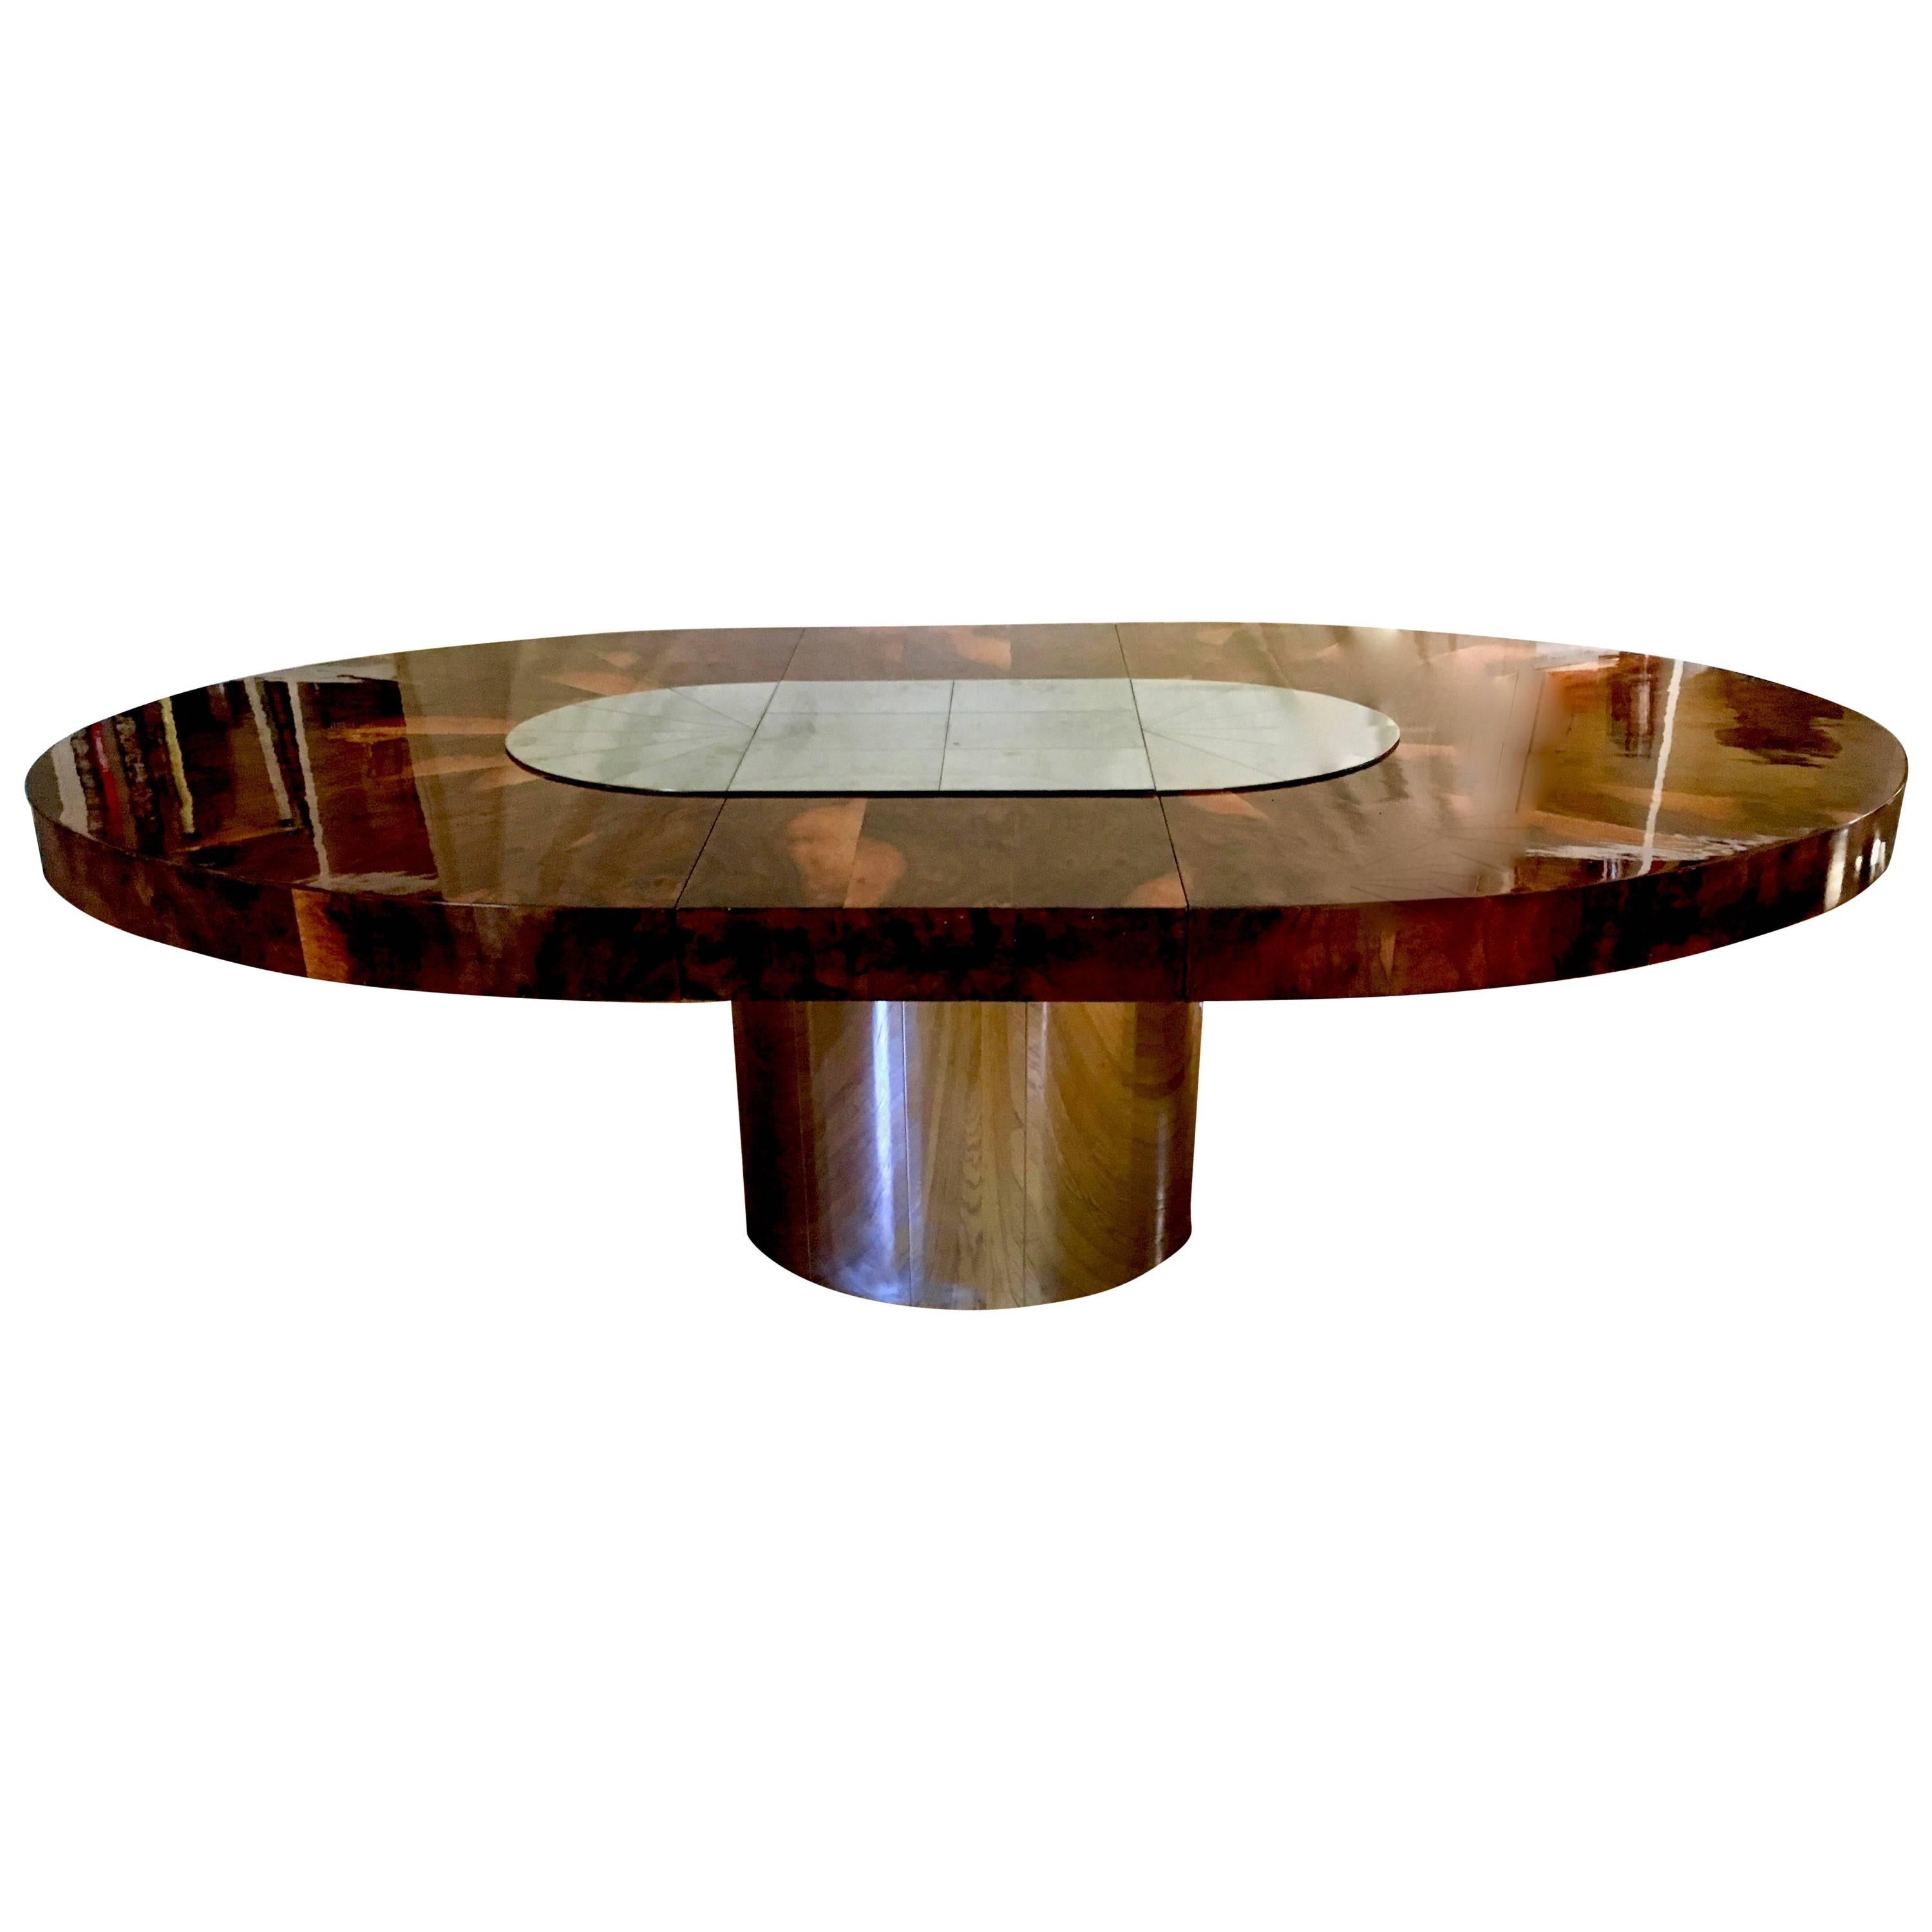 Paul Evans Burl Wood and Chrome Dining Table for Directional, circa 1970s